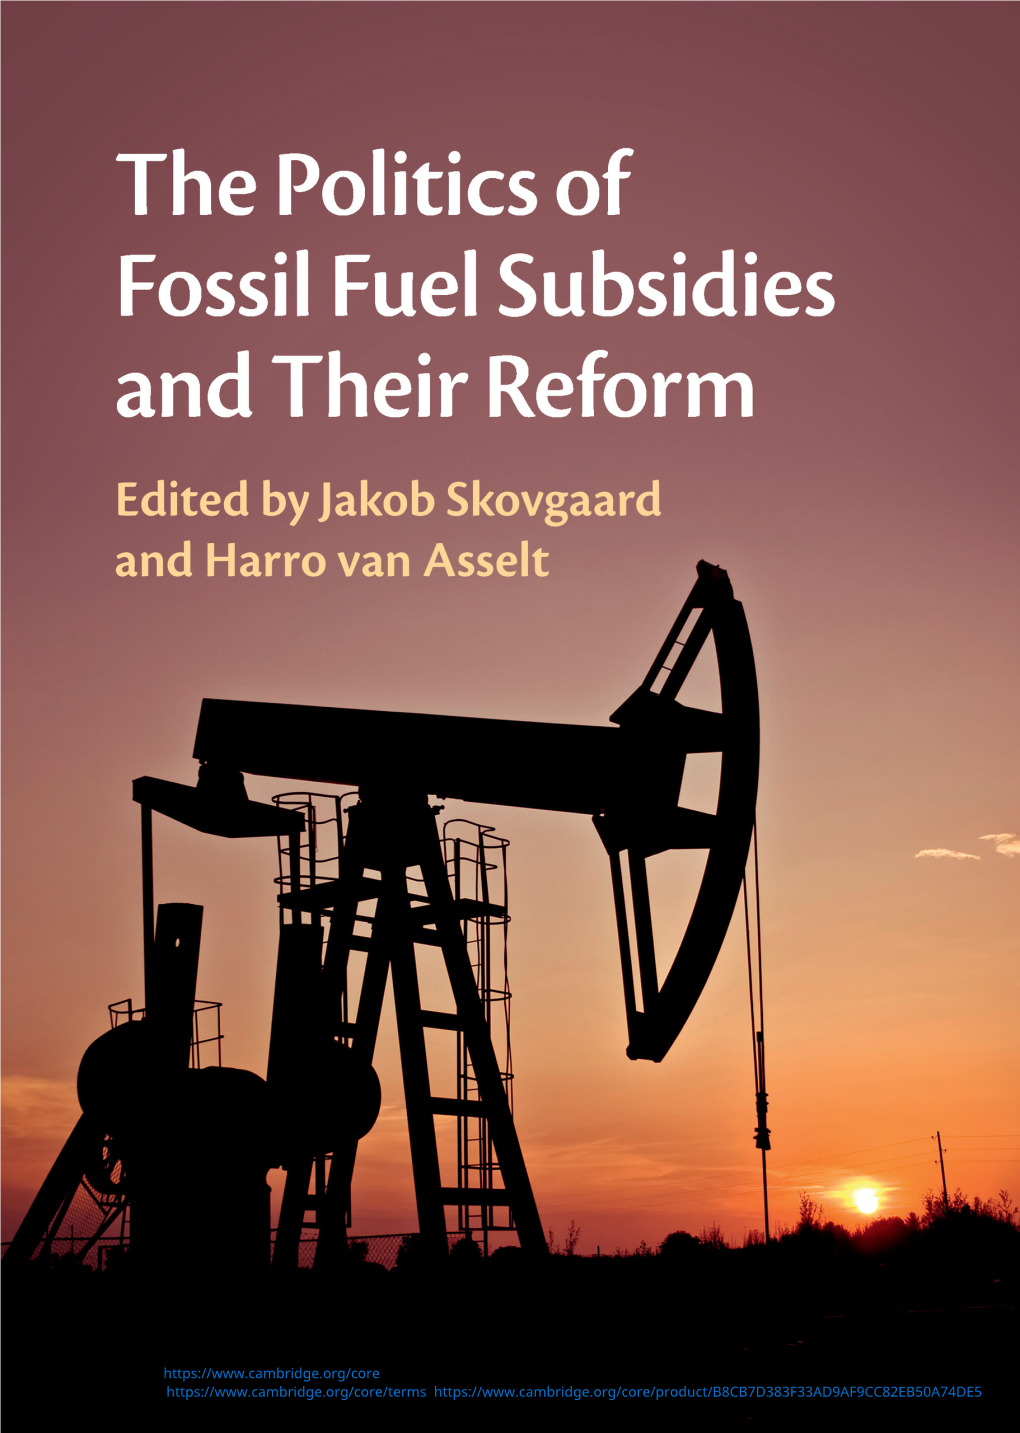 The Politics of Fossil Fuel Subsidies and Their Reform